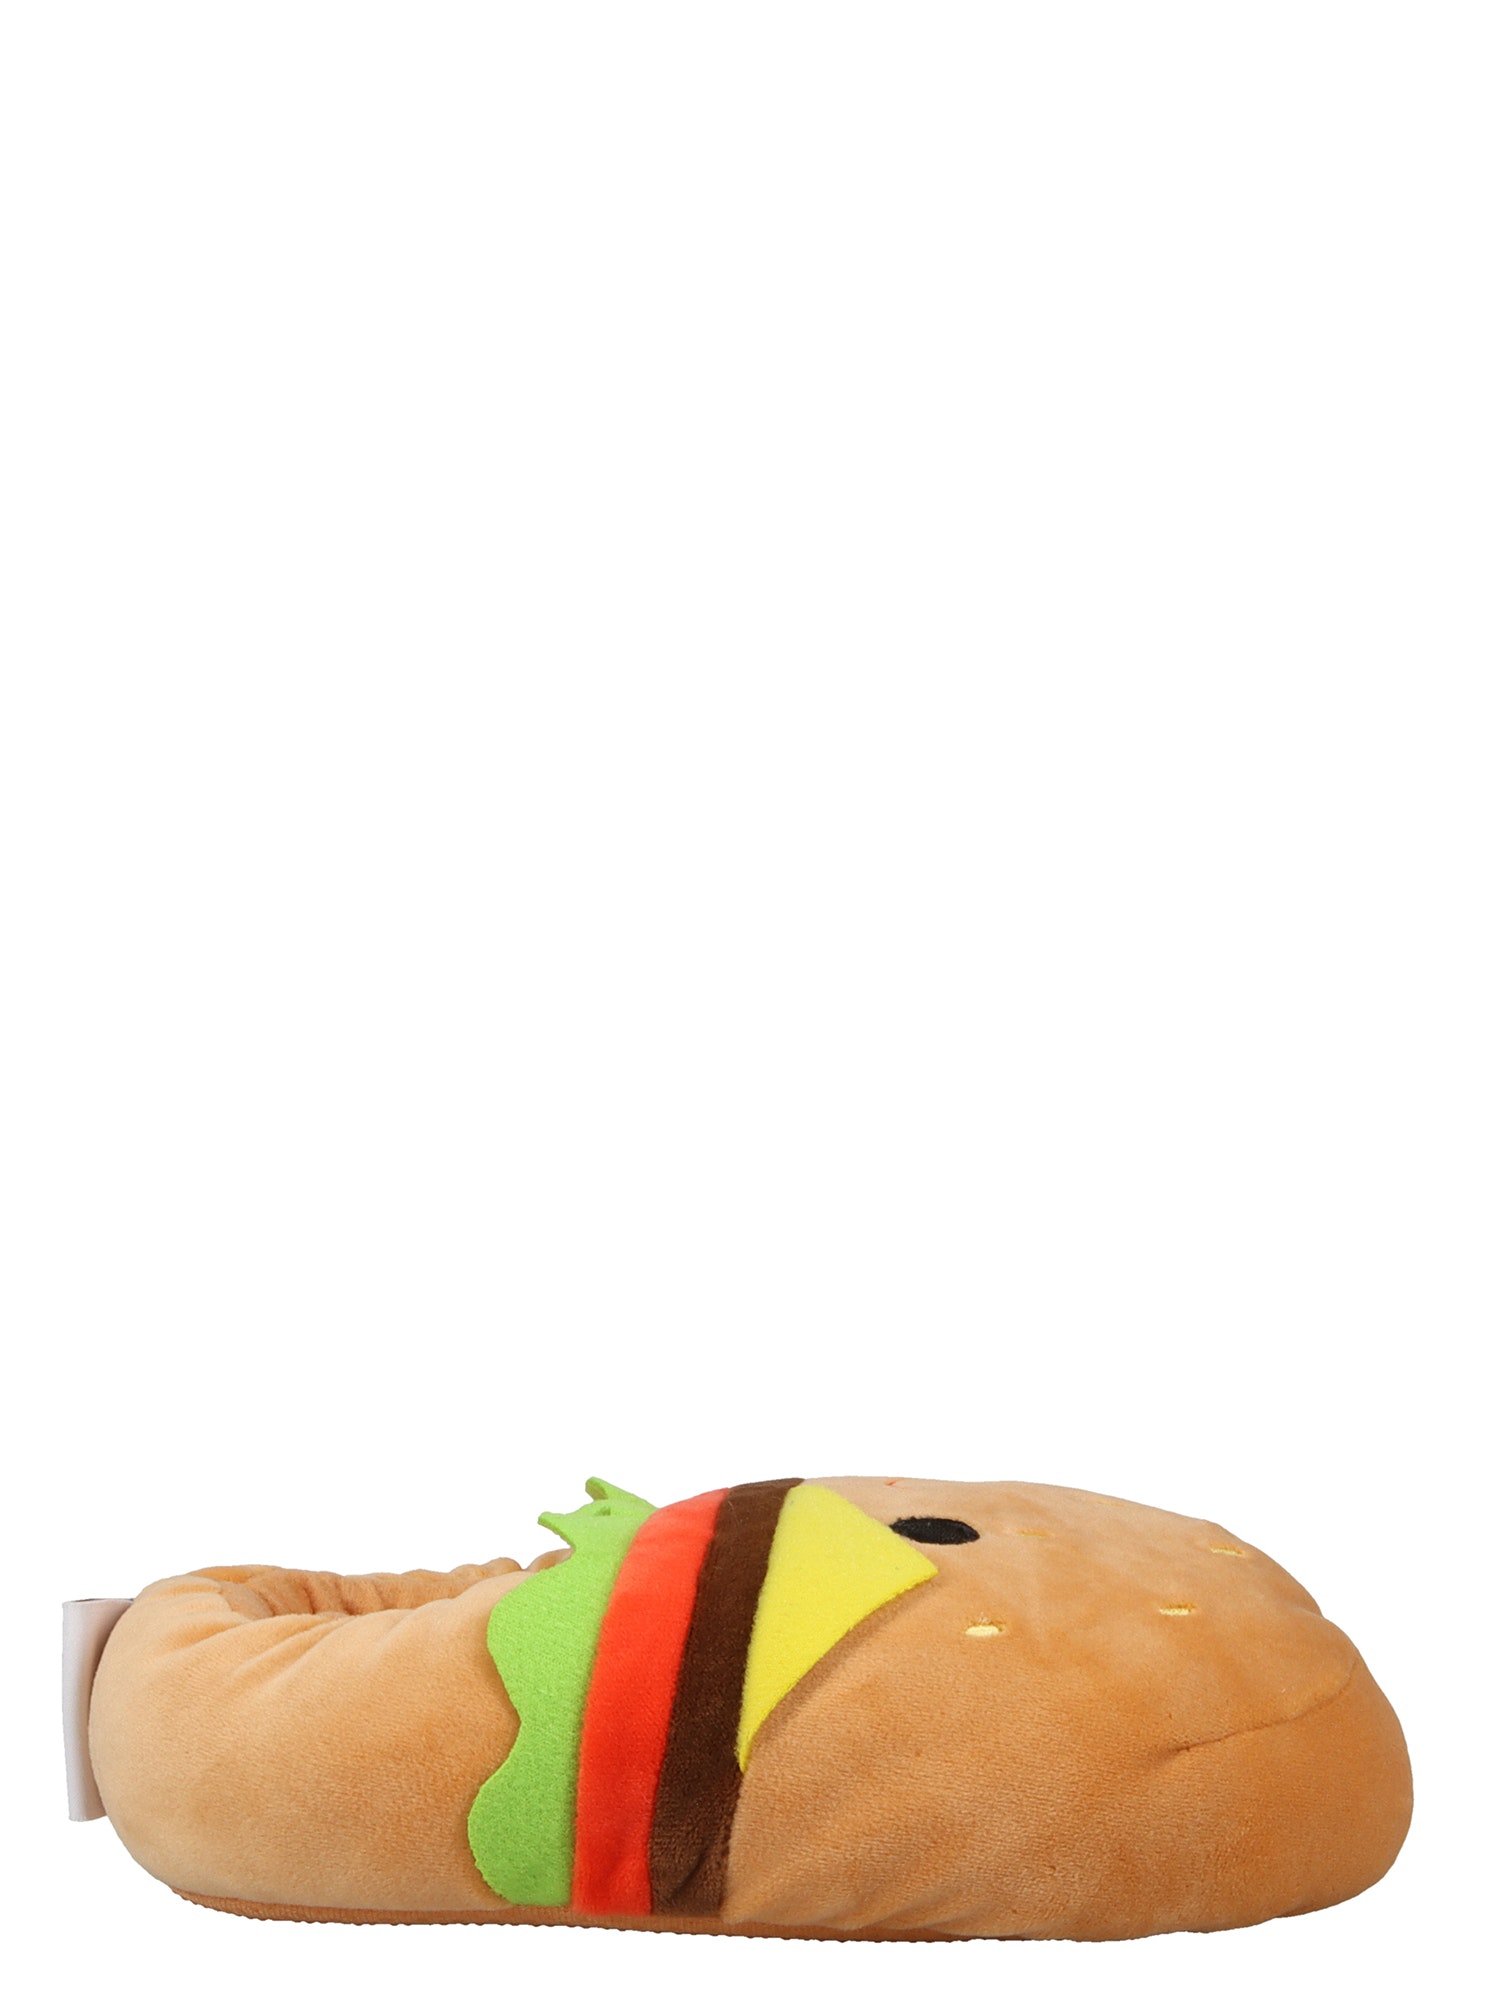 Squishmallows Kids Cheeseburger & Fries Mix Match Slippers - image 5 of 6